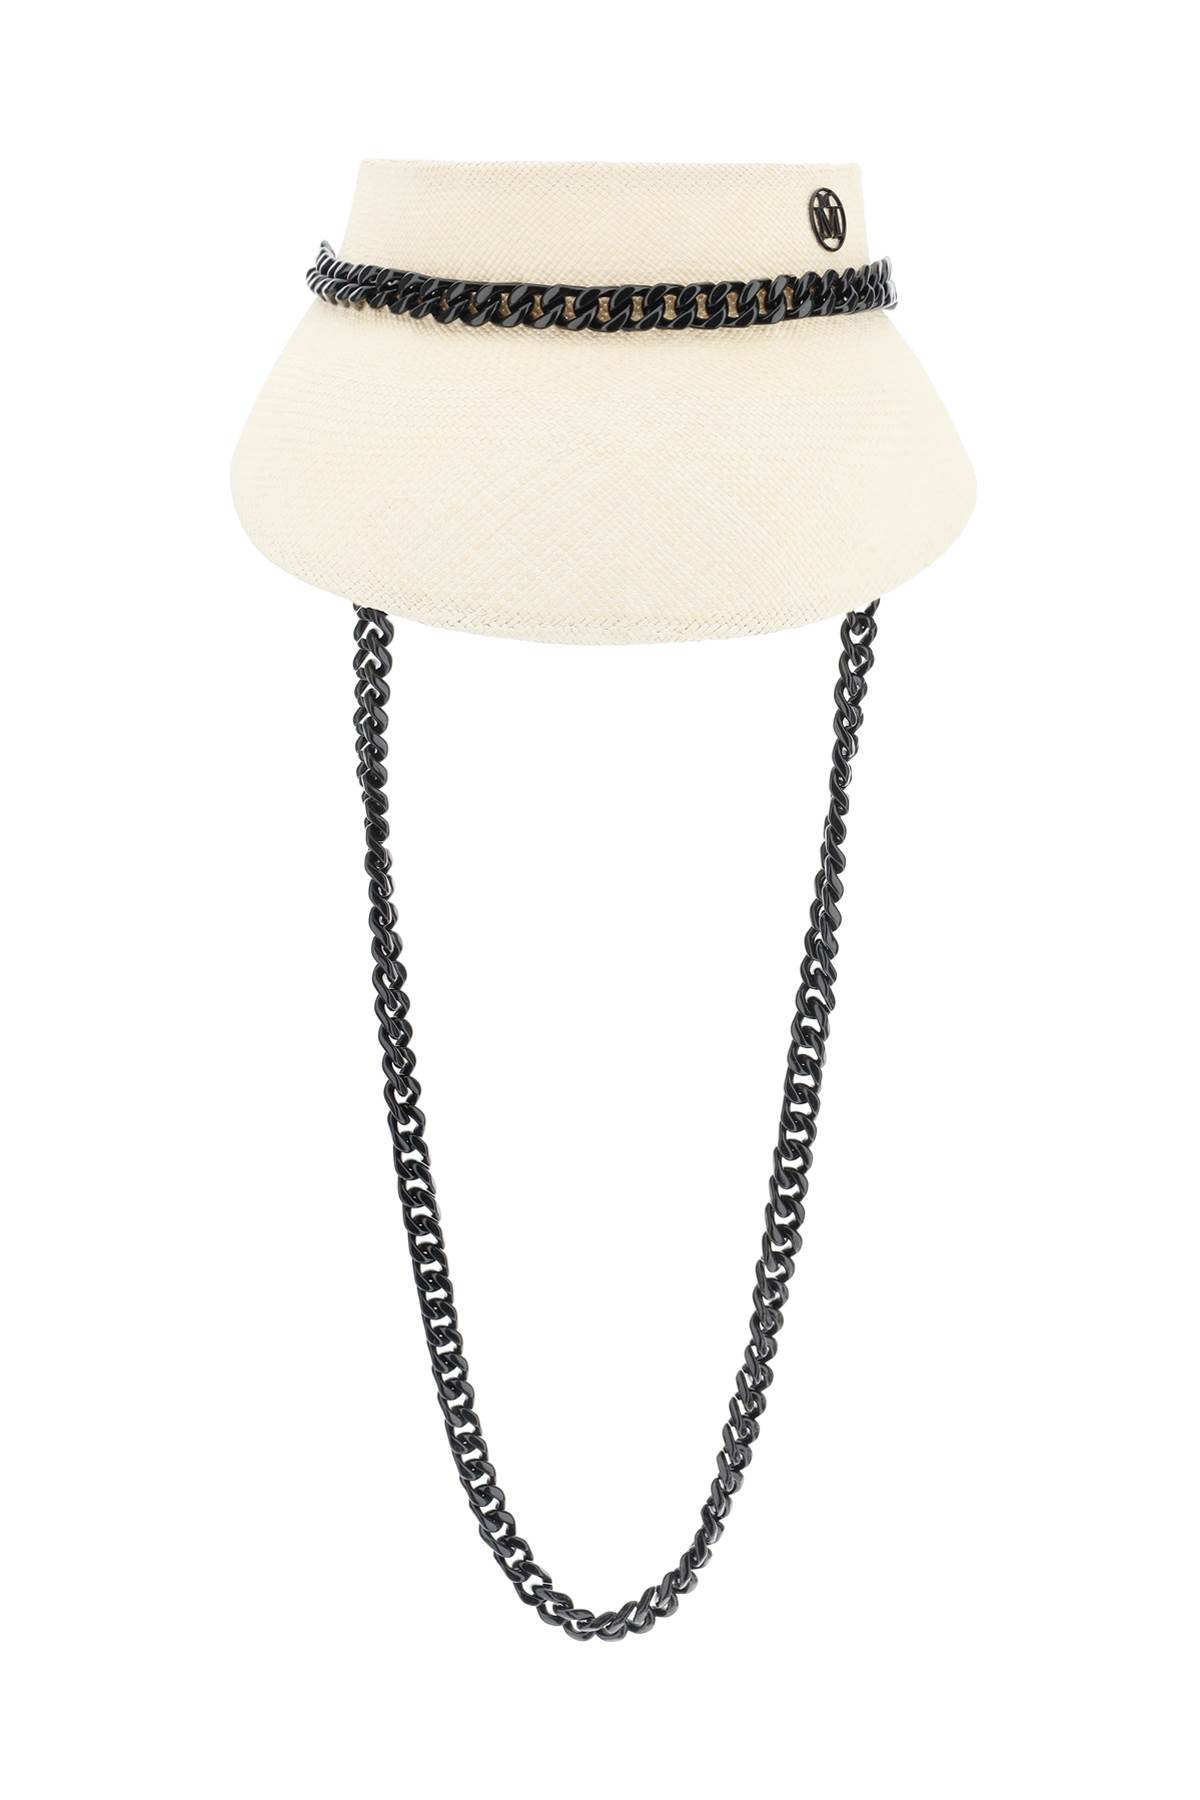 Maison Michel Patty Visor With Chains